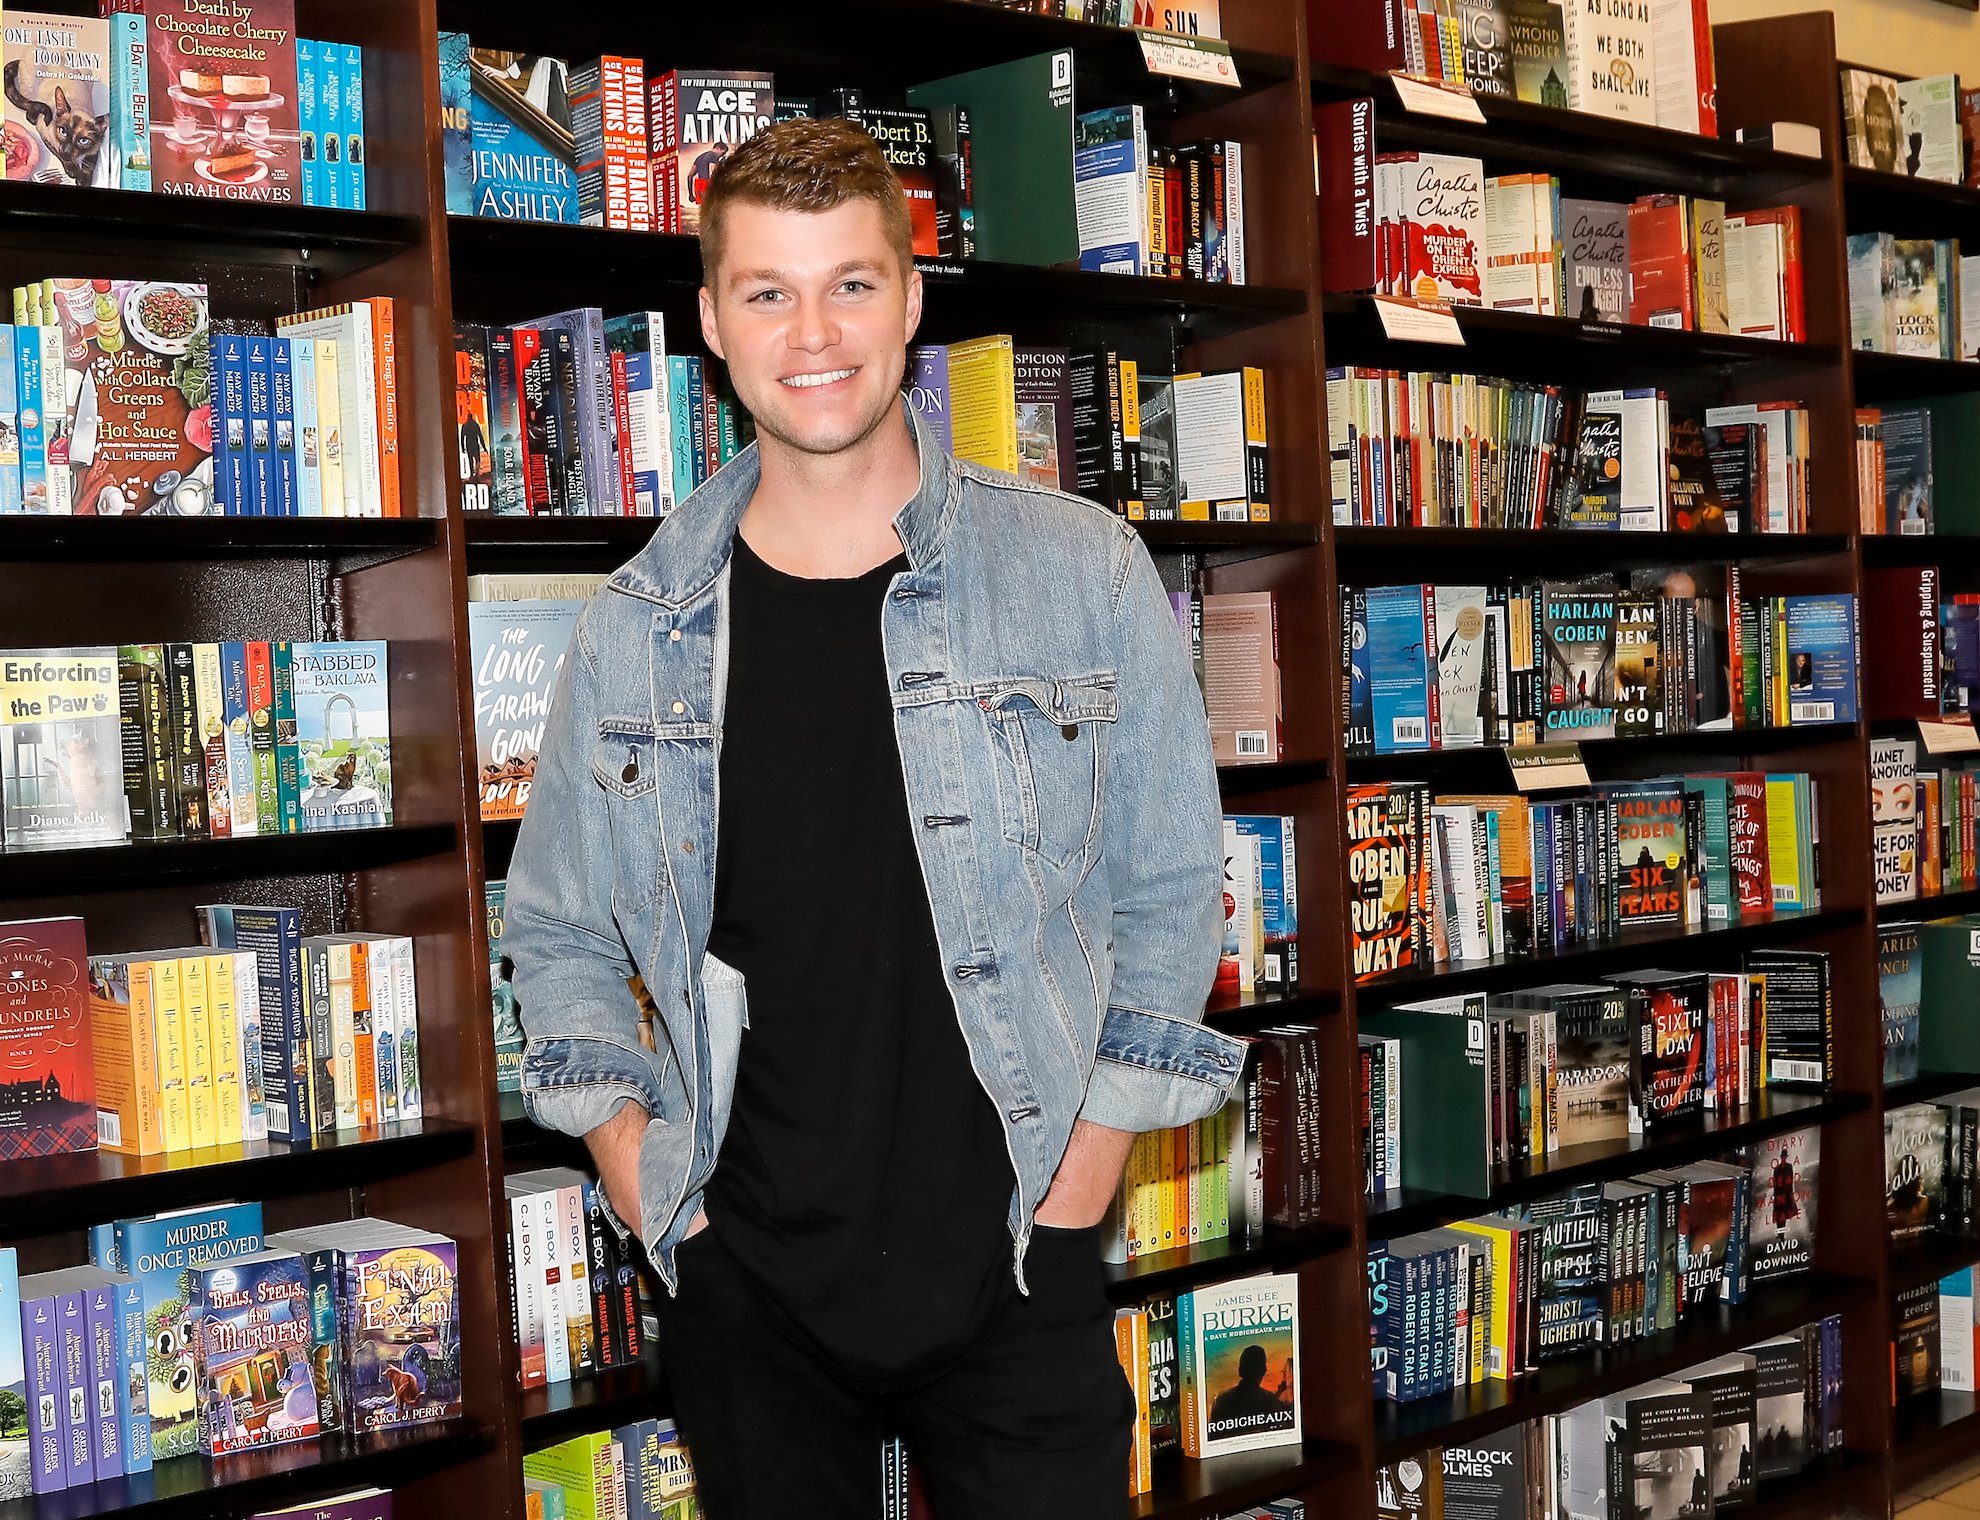 Jeremy Roloff from 'Little People, Big World' smiling in a bookstore